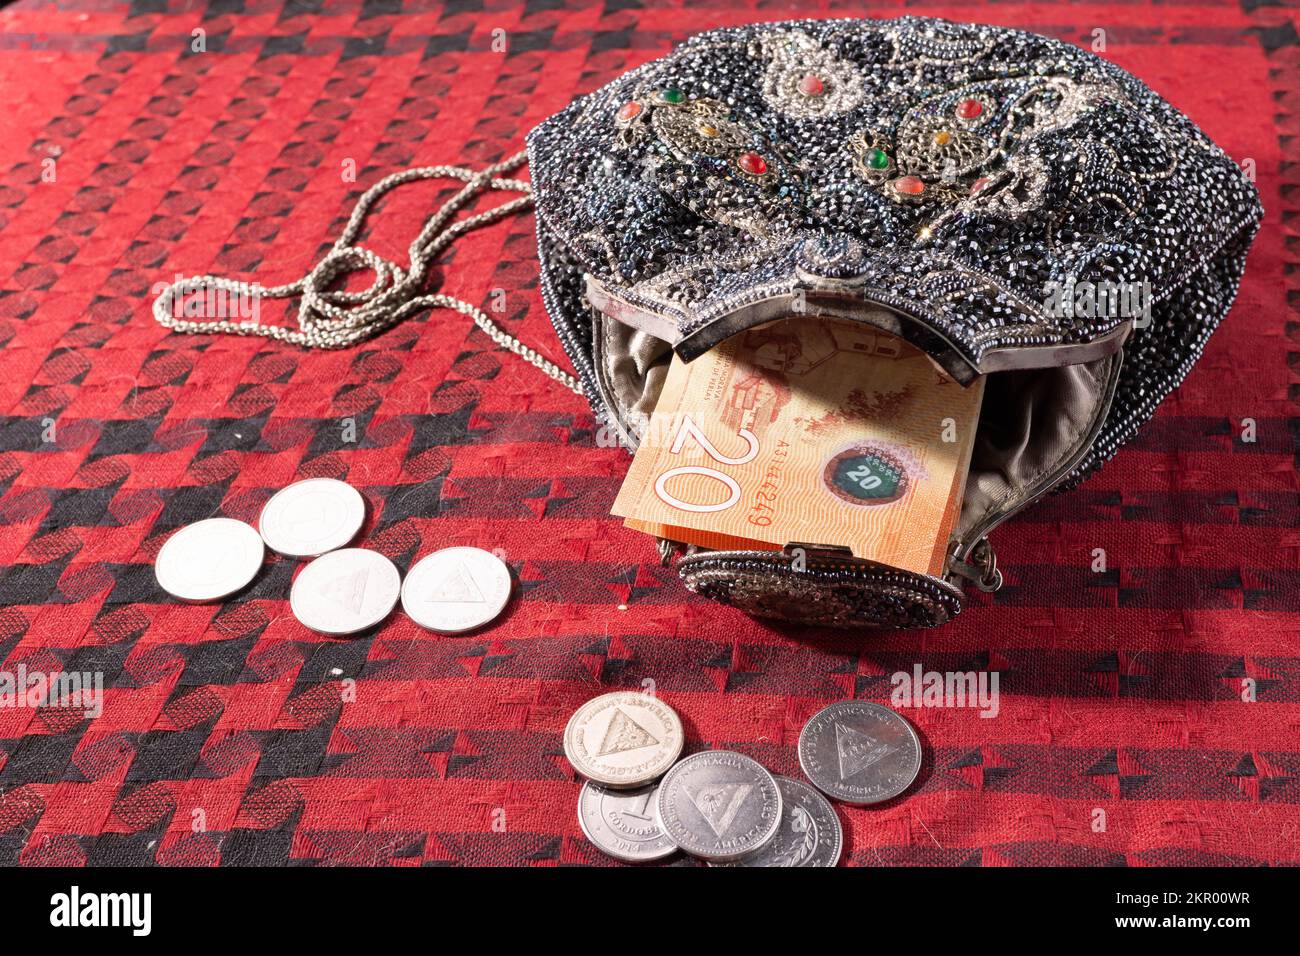 Beaded antique purse with Nicaraguan currency and coins on a red and black textile background, bought in the US in the 1980s. Stock Photo